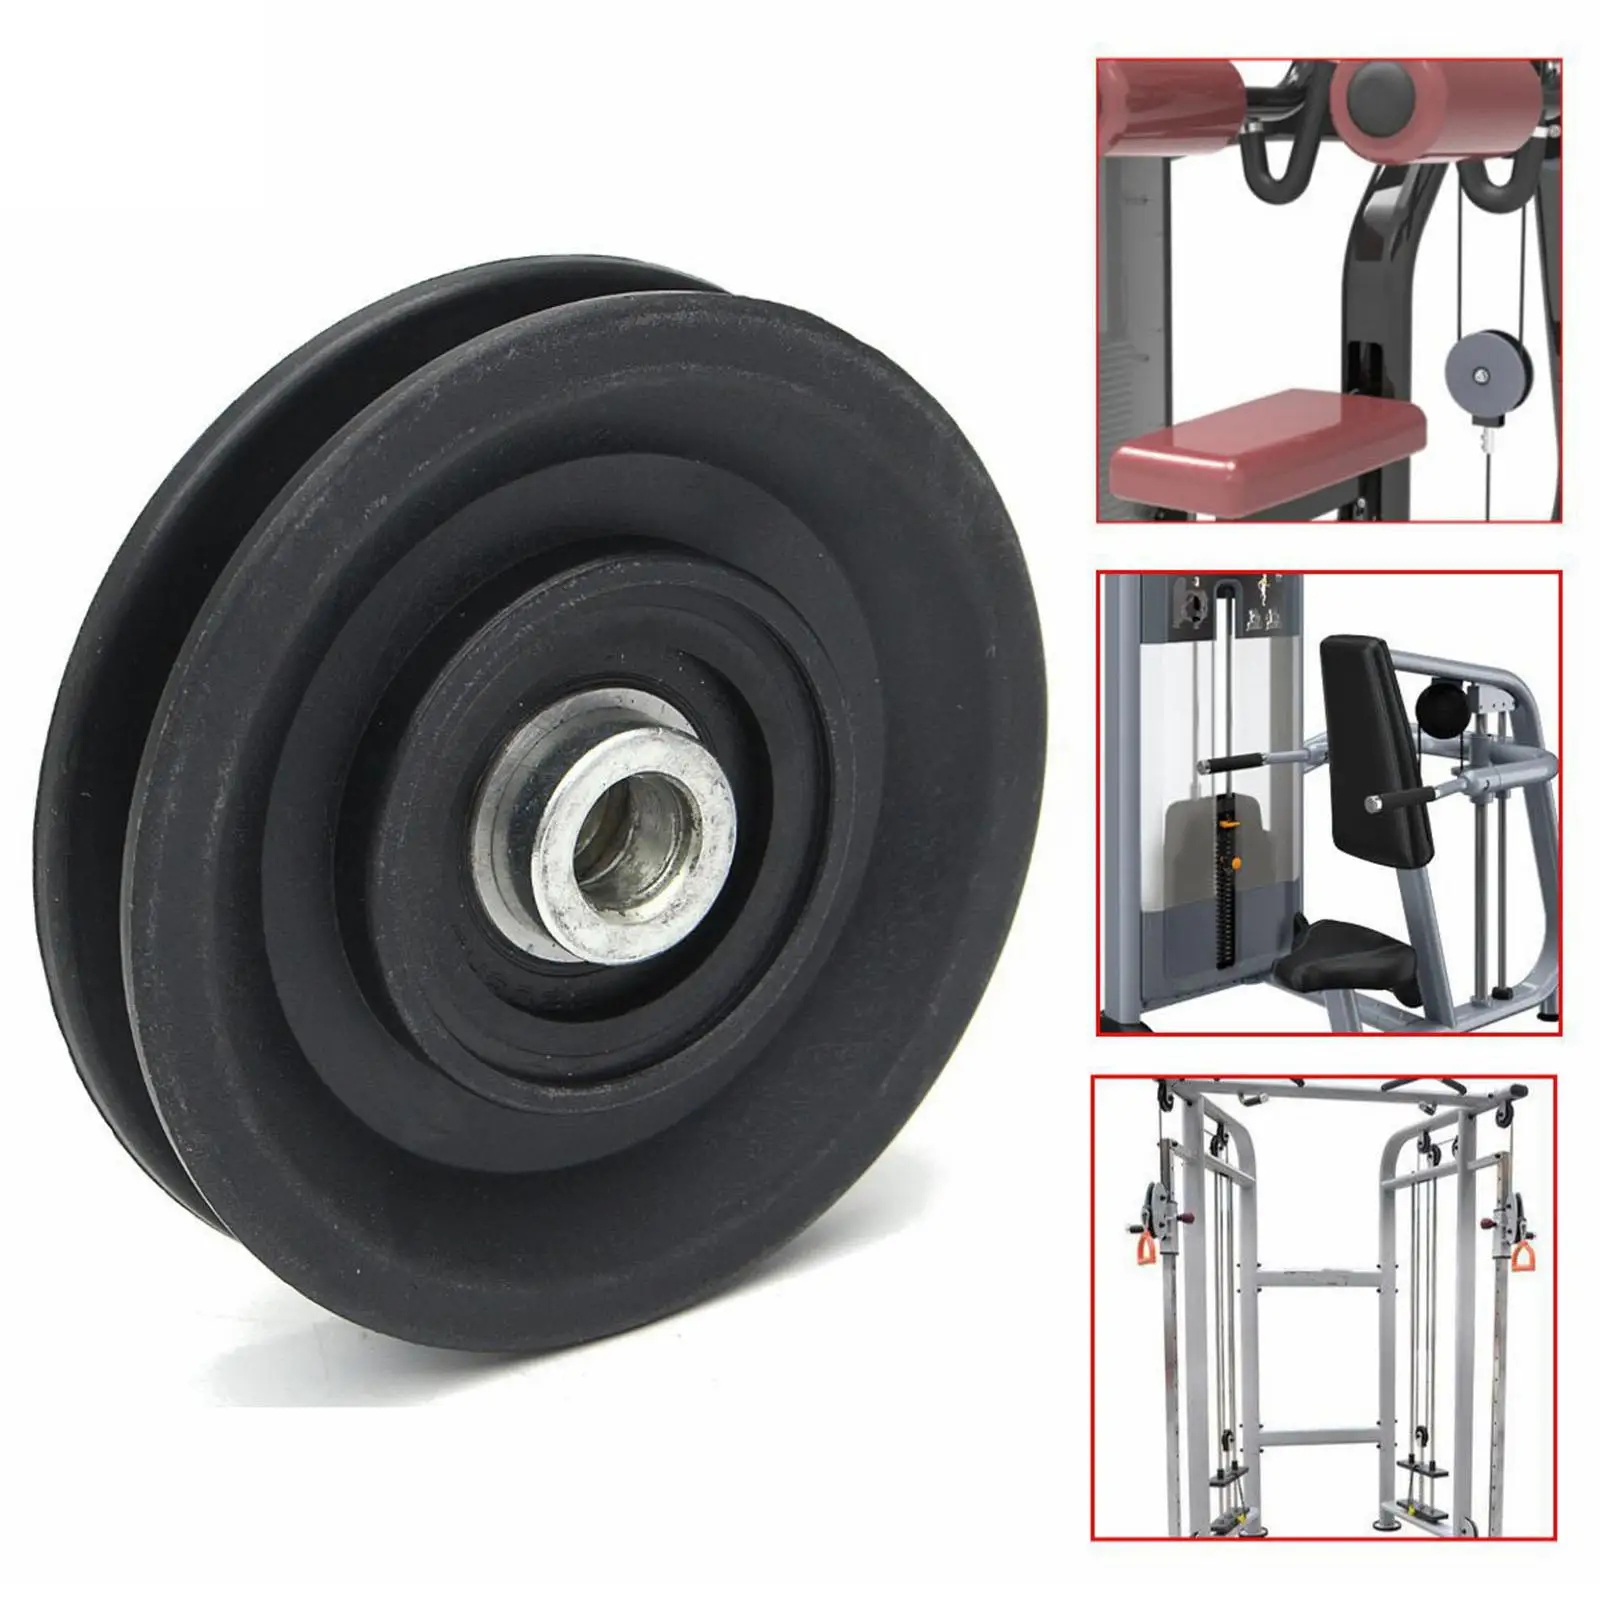 Pulley Wheel for Gym Equipment90mm/3.5